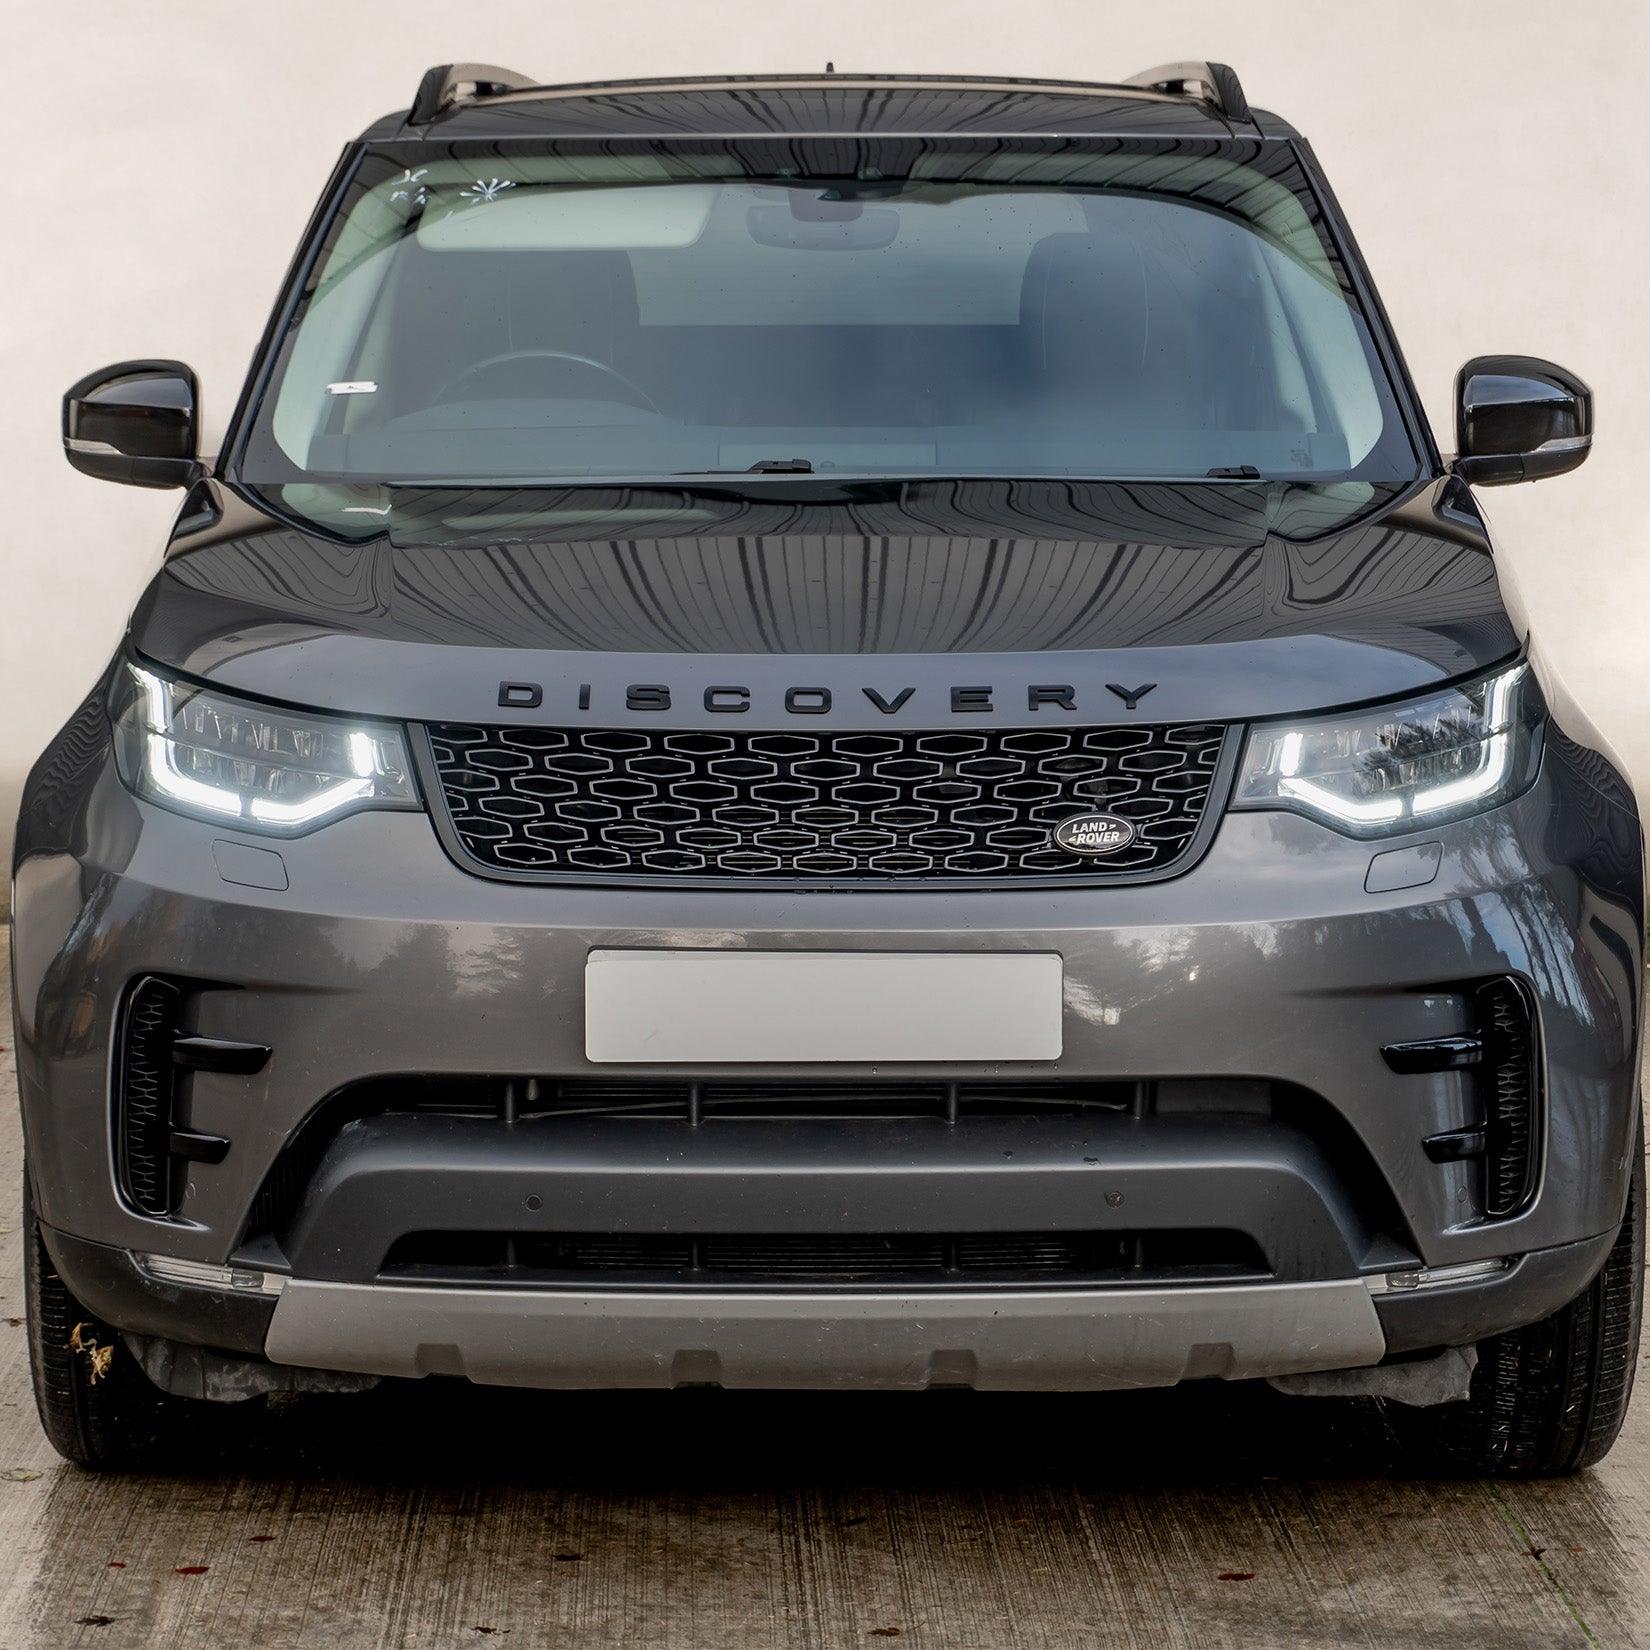 LAND ROVER DISCOVERY 5 2017 ON - DYNAMIC FRONT GRILLE - BLACK - Storm Xccessories